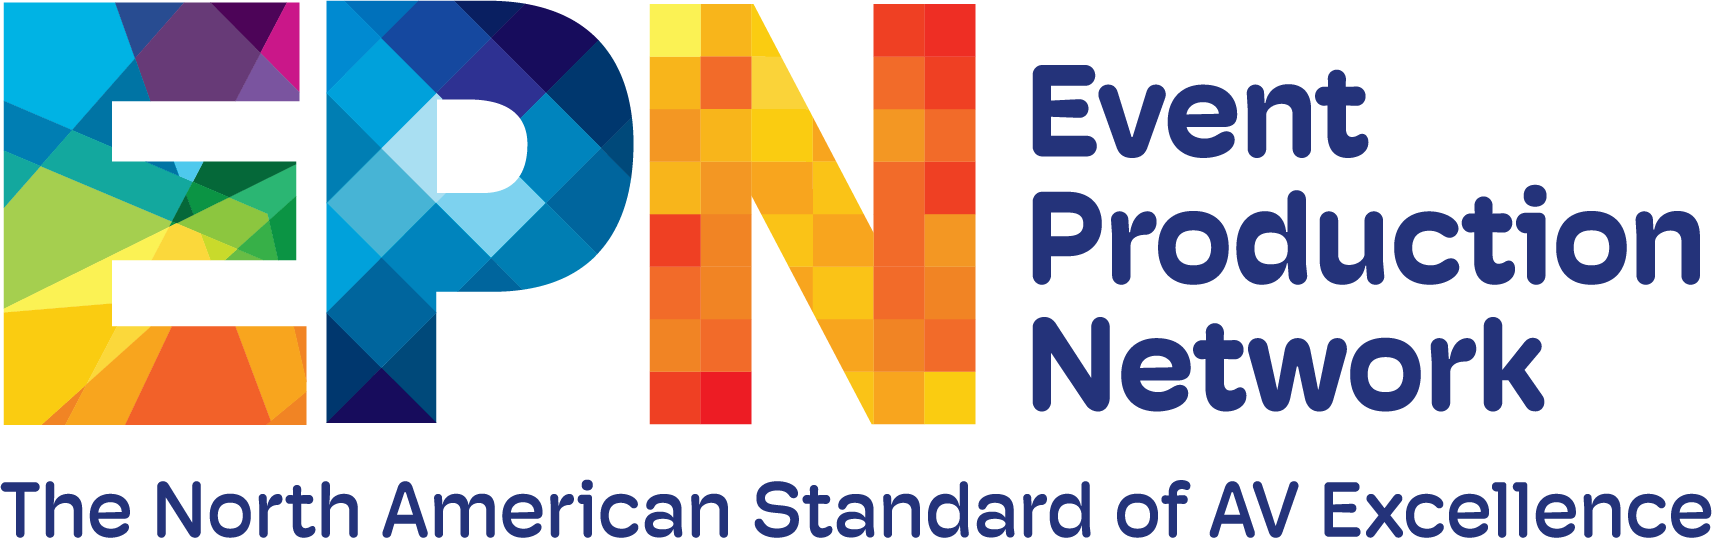 EPN is a nationwide alliance of leading Audio Visual production companies